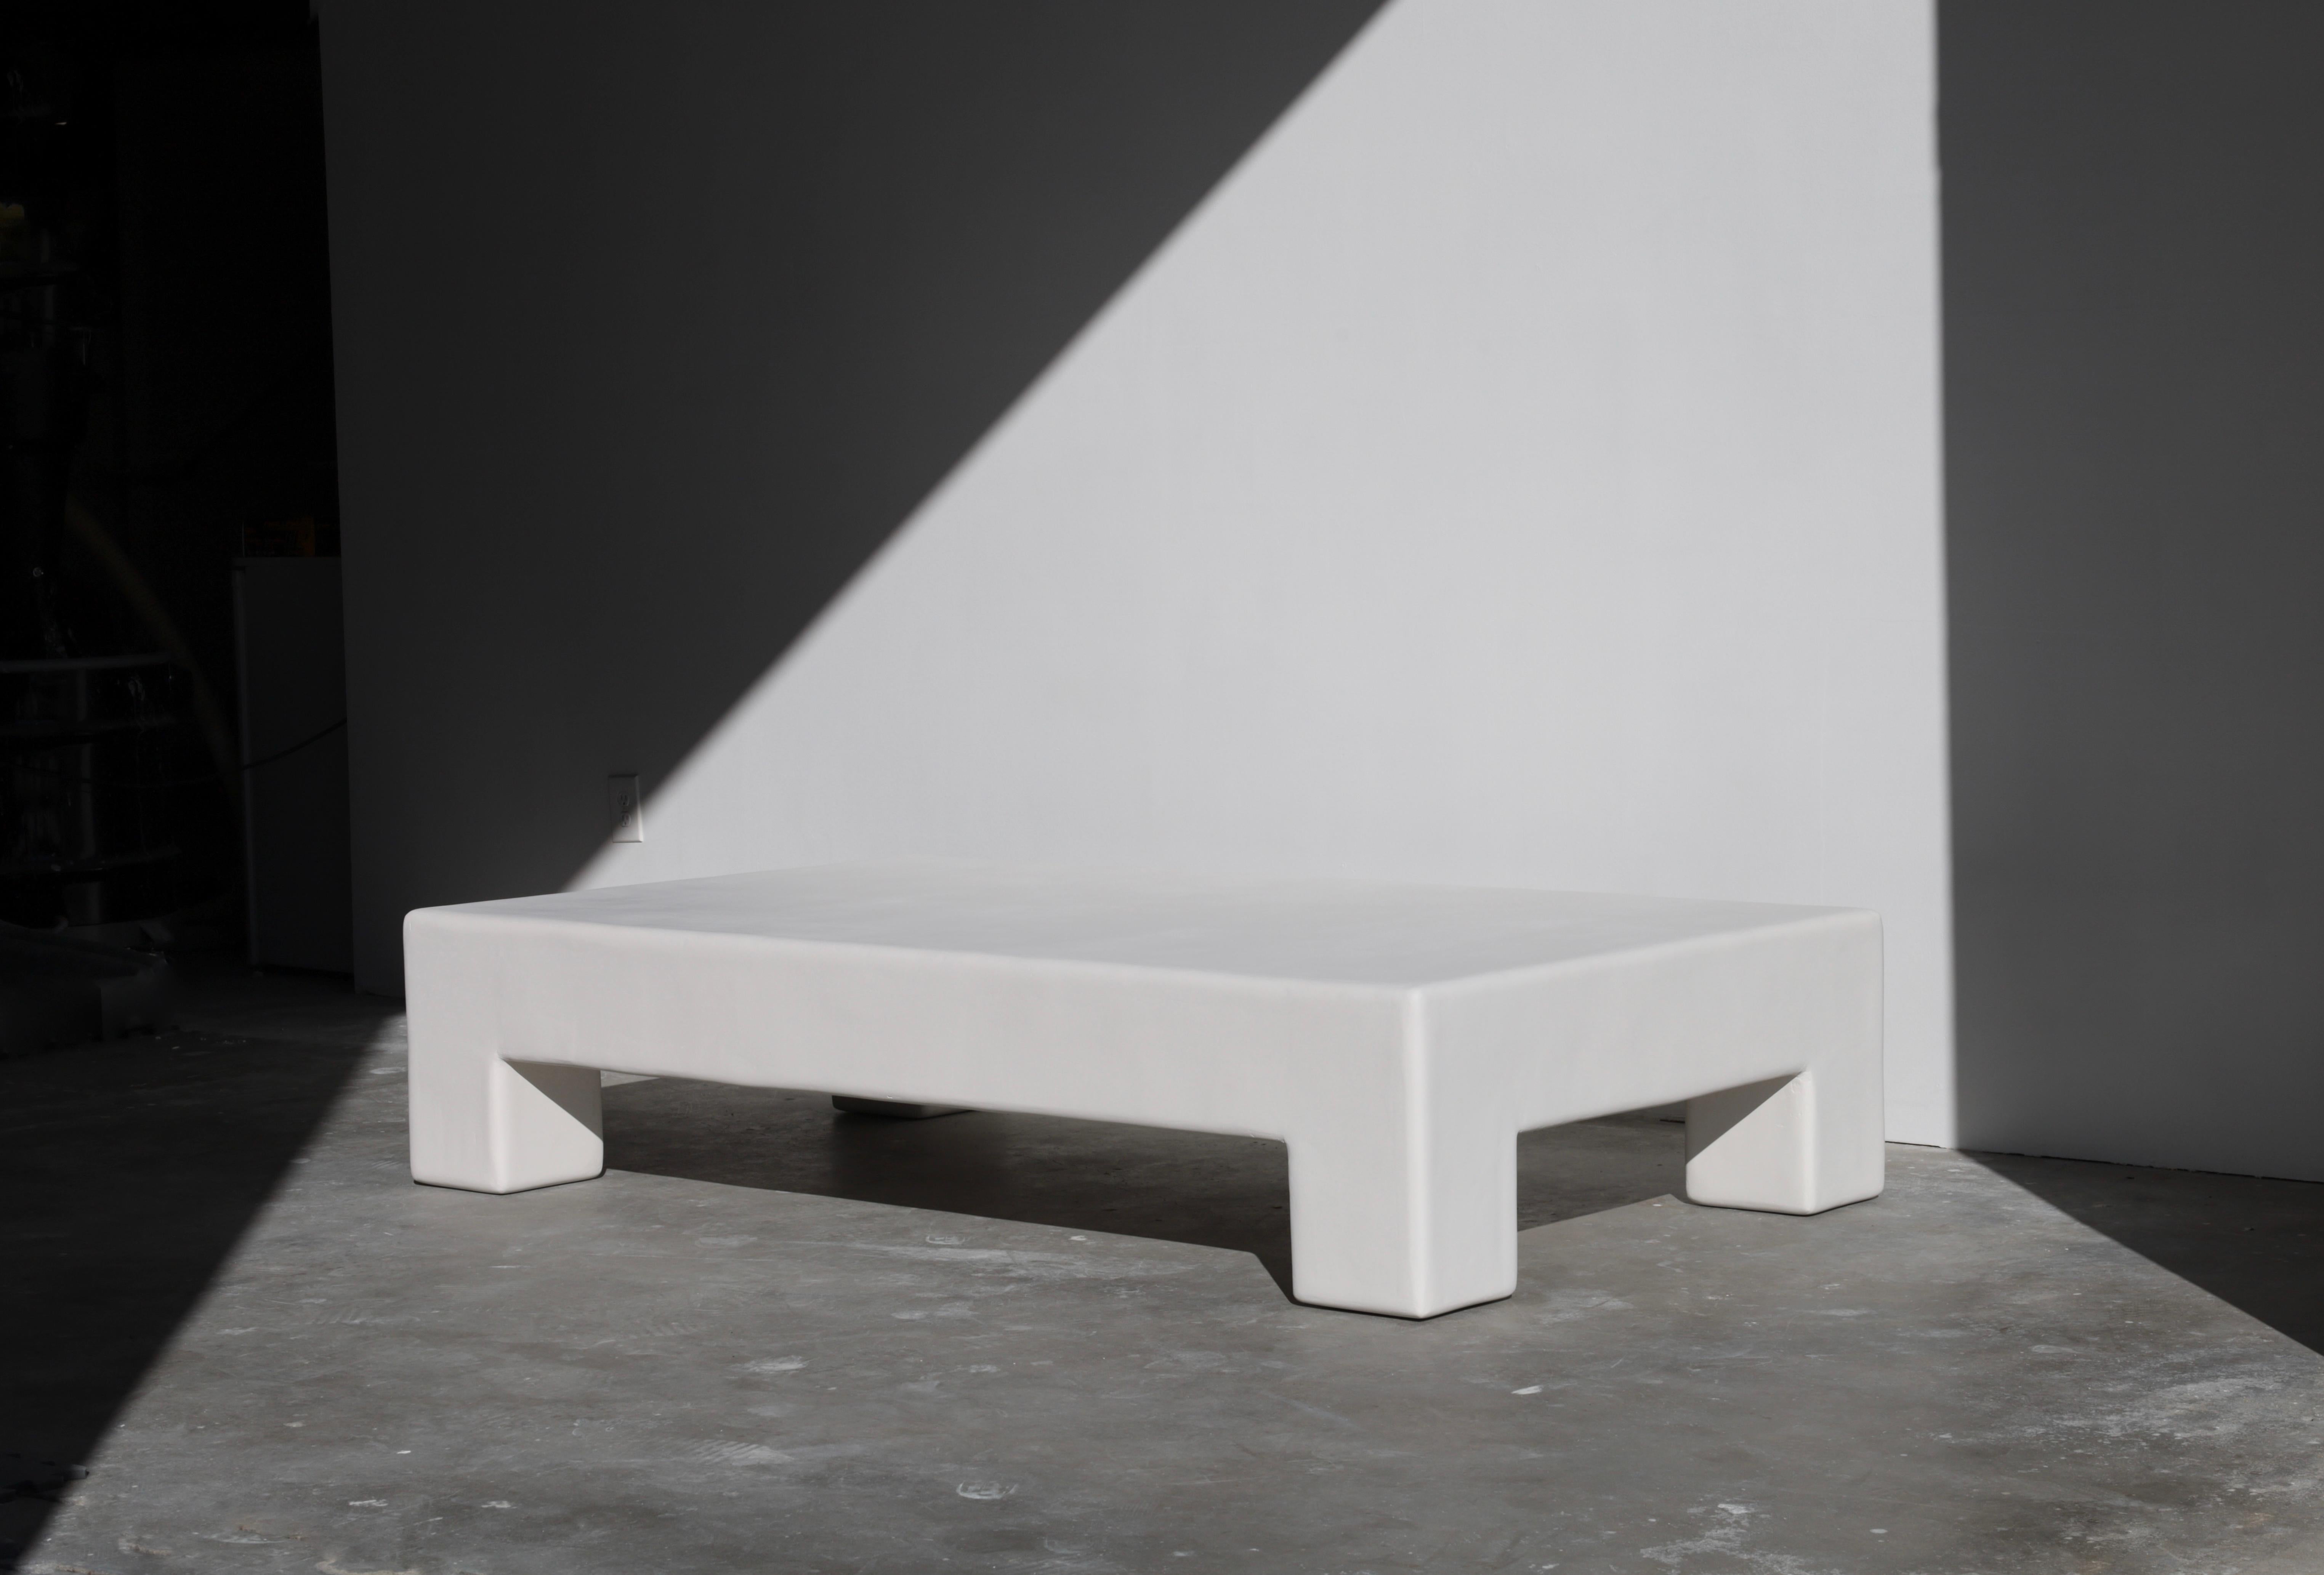 rectangular & oversized version of our scout signature coffee table

minimalist design and organic look 

each öken house studio piece is handmade & made to order by a small team of plaster artisans and we try to utilize local vendors as much as